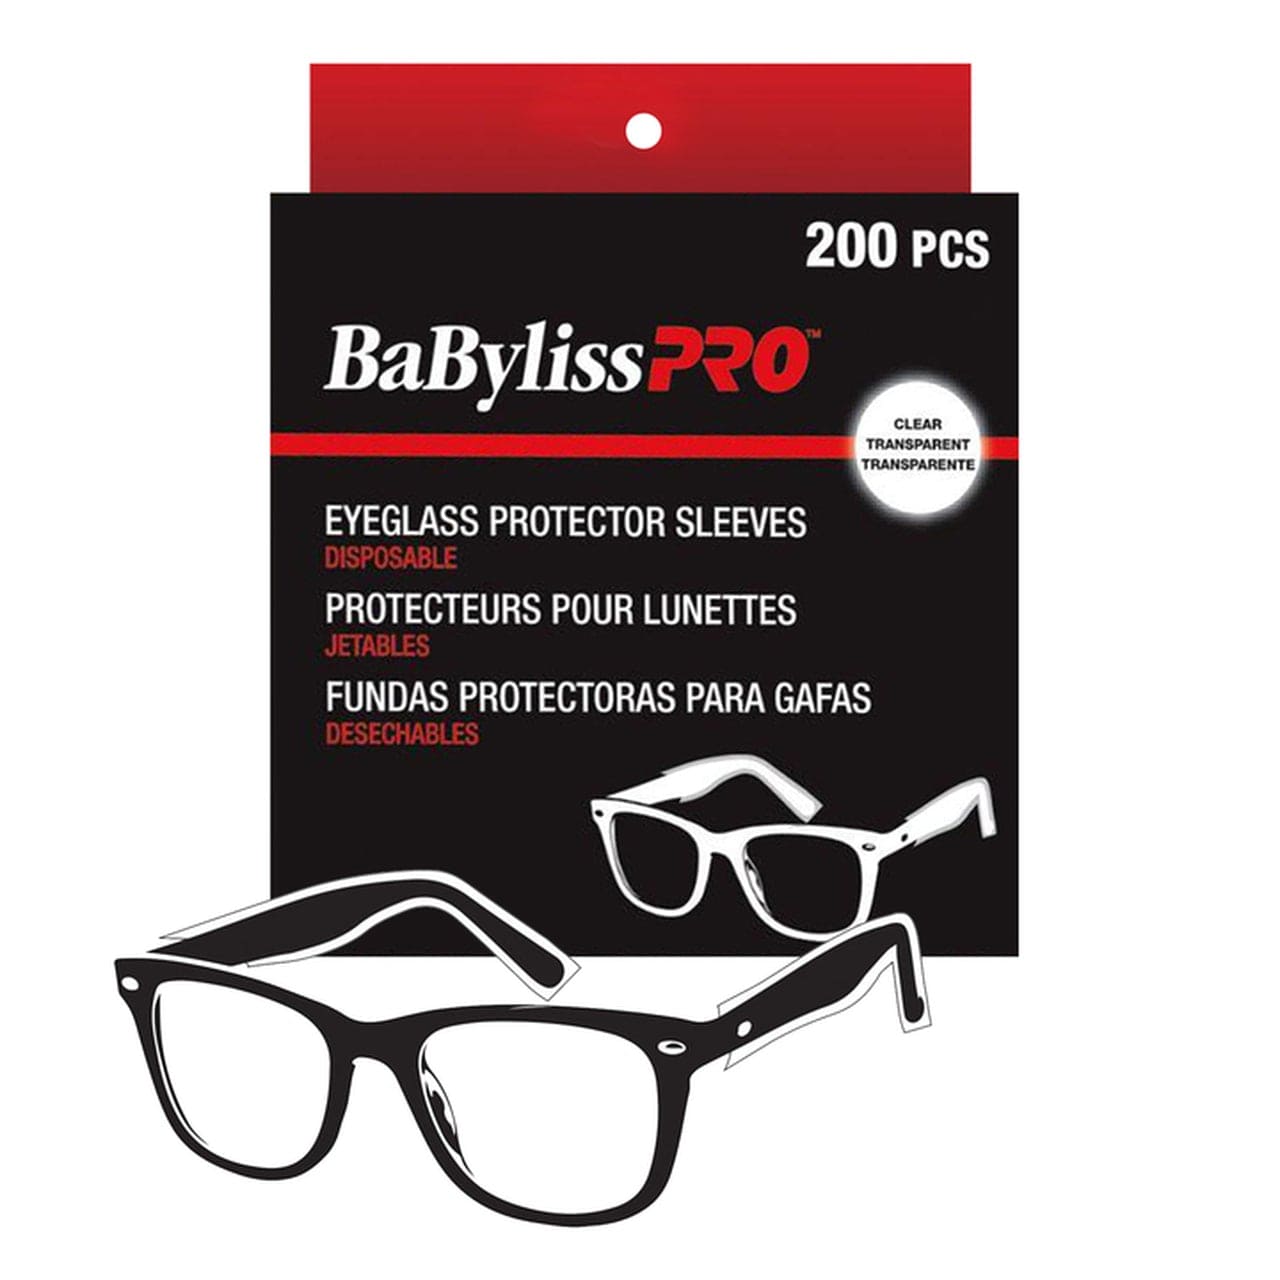 BABYLISS PRO_Disposable Eyeglass Protector Sleeves 200pcs_Cosmetic World